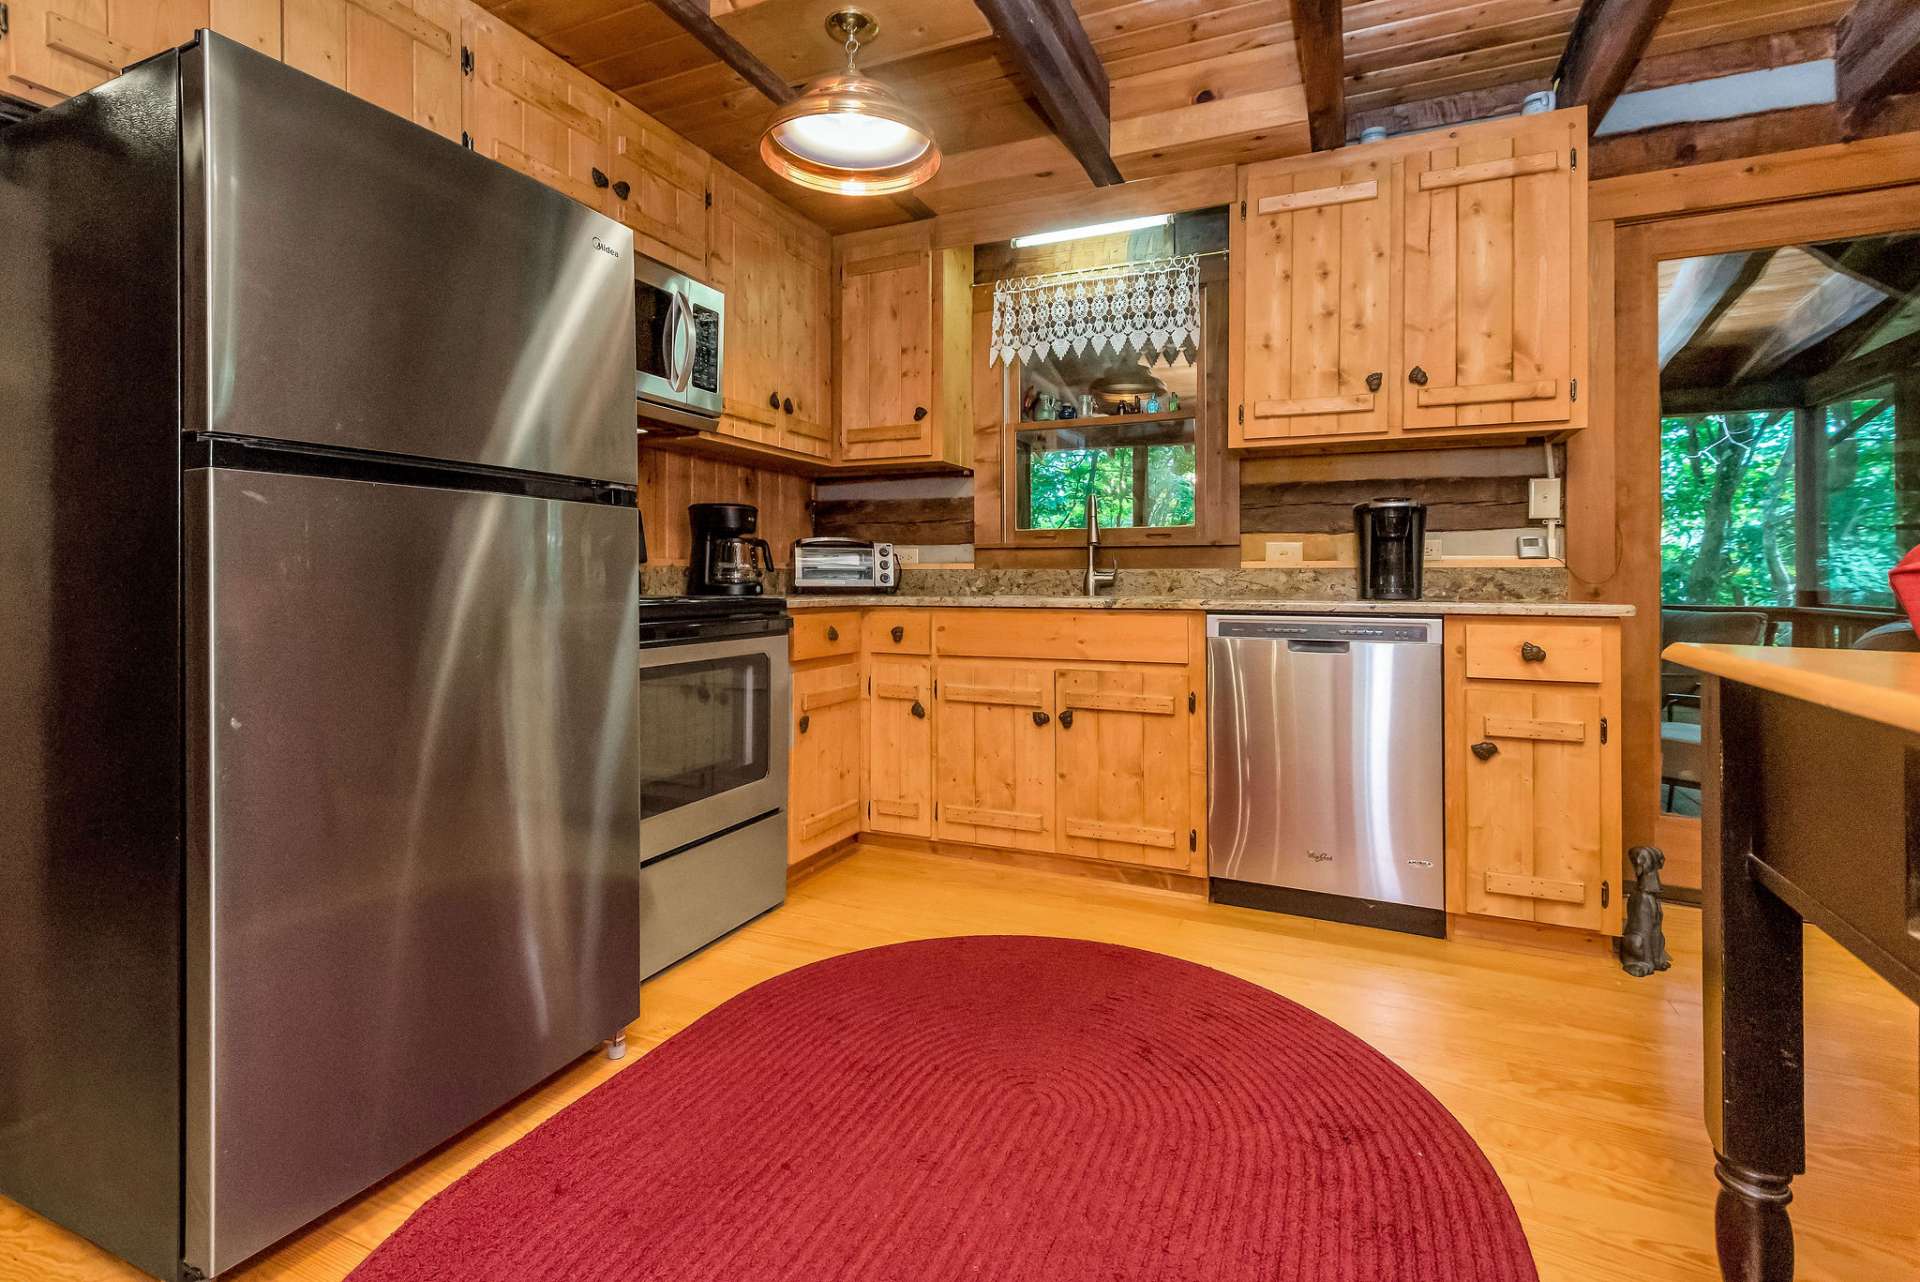 Kitchen features granite counter tops, stainless appliances, and custom cabinets.